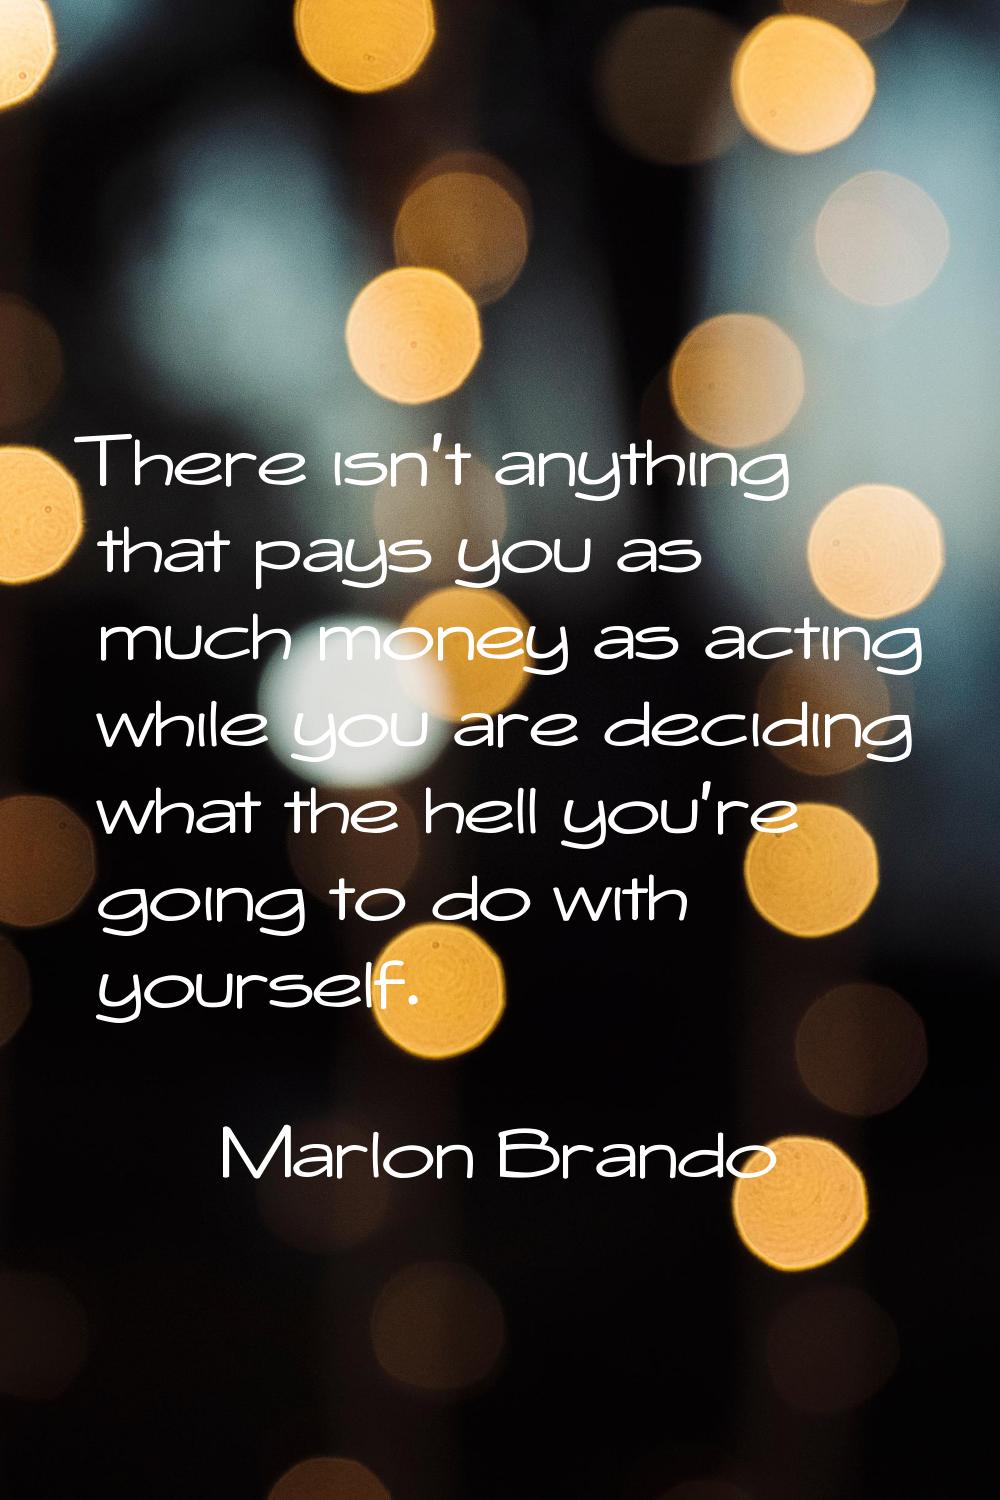 There isn't anything that pays you as much money as acting while you are deciding what the hell you